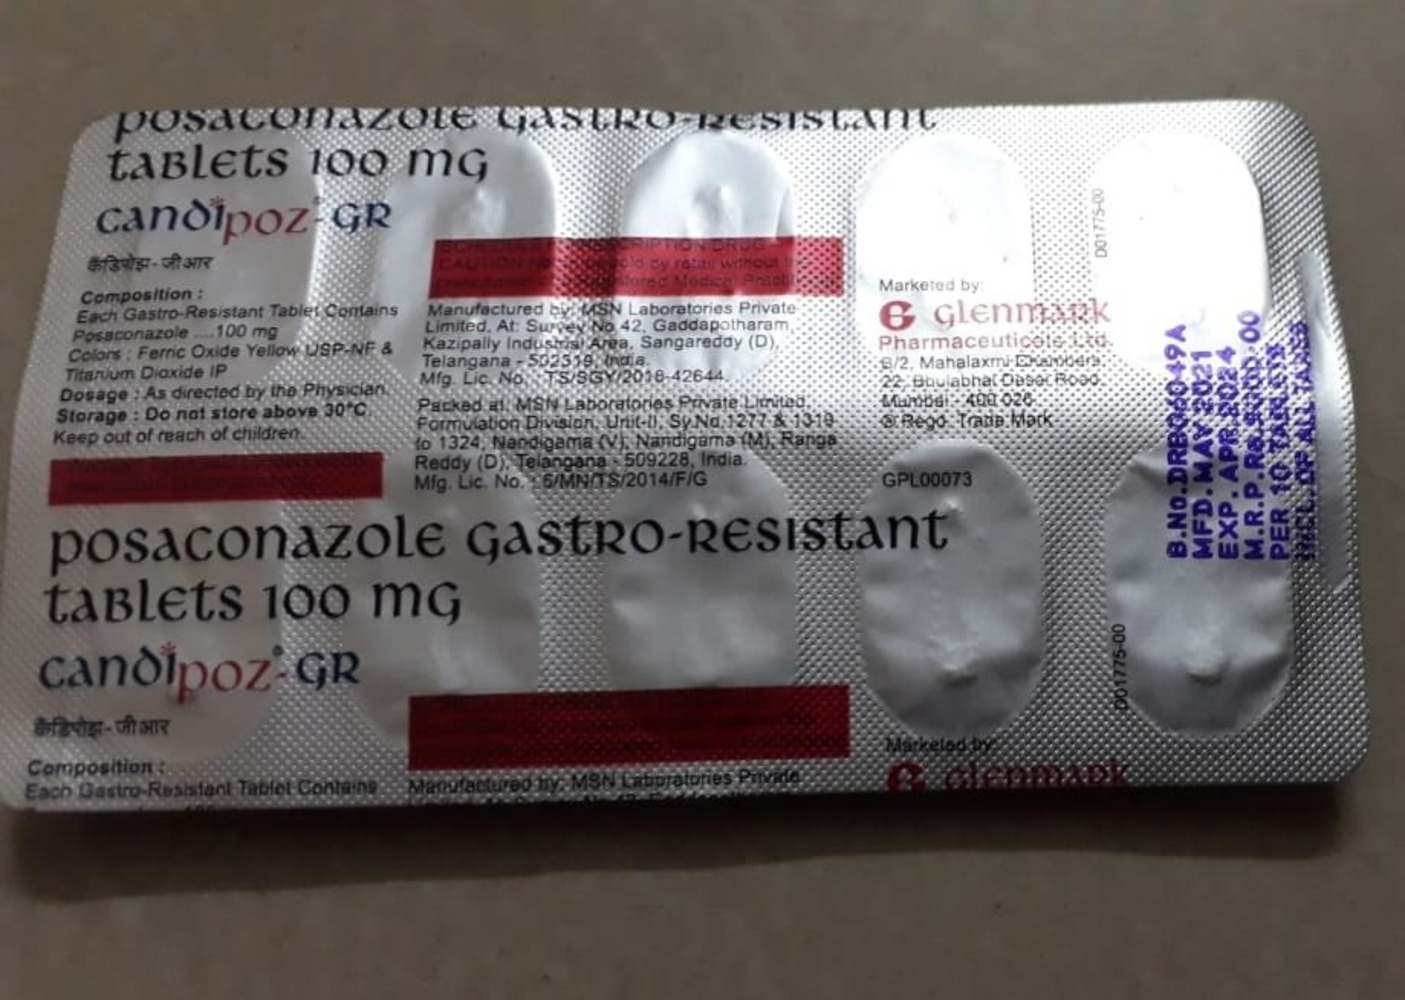 Candipoz Gr Tablet